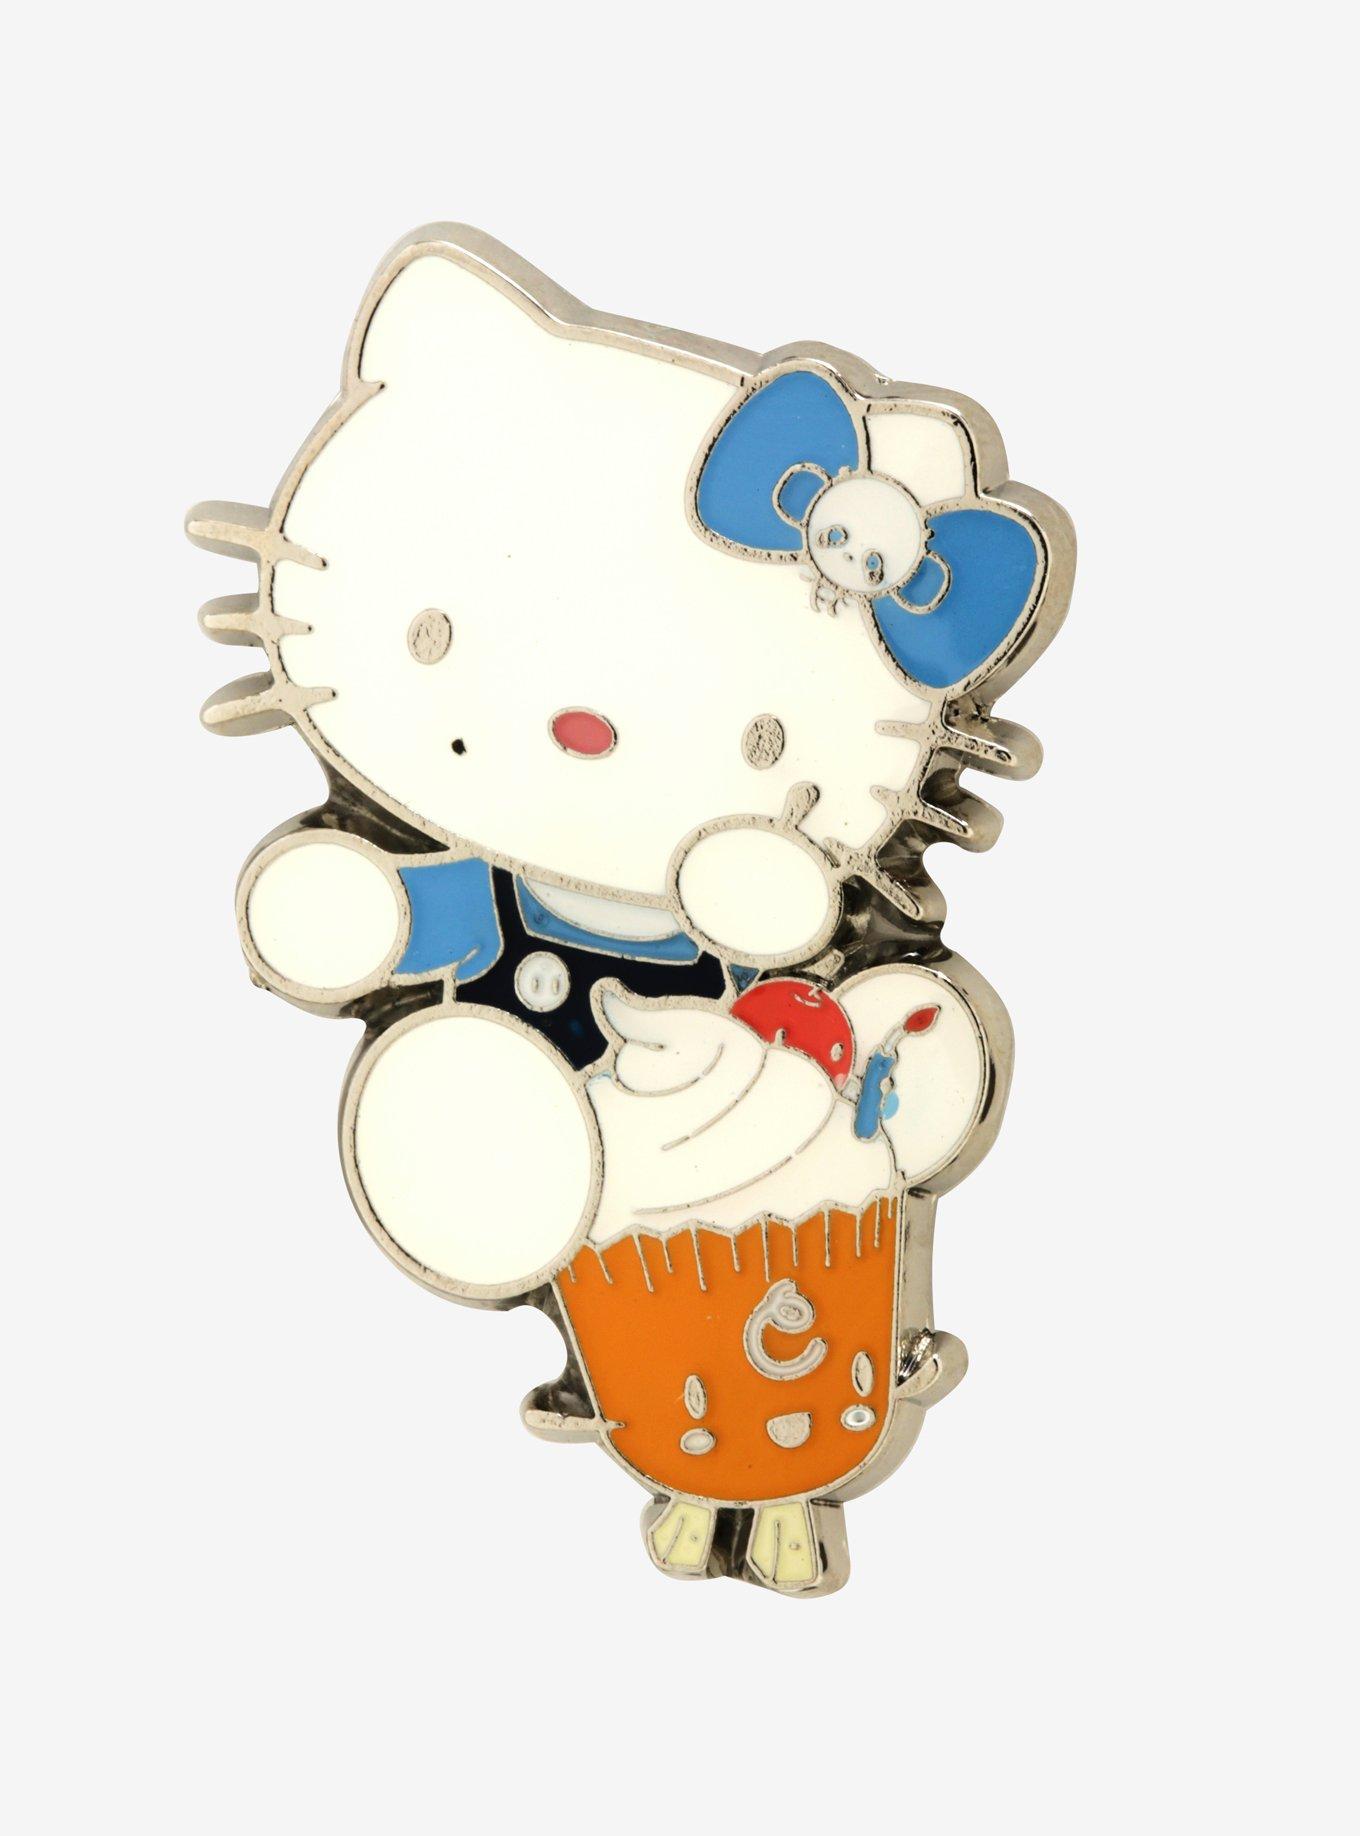 Sanrio Hello Kitty and Friends x Attack on Titan Character Pairs Blind Box  Enamel Pin - BoxLunch Exclusive